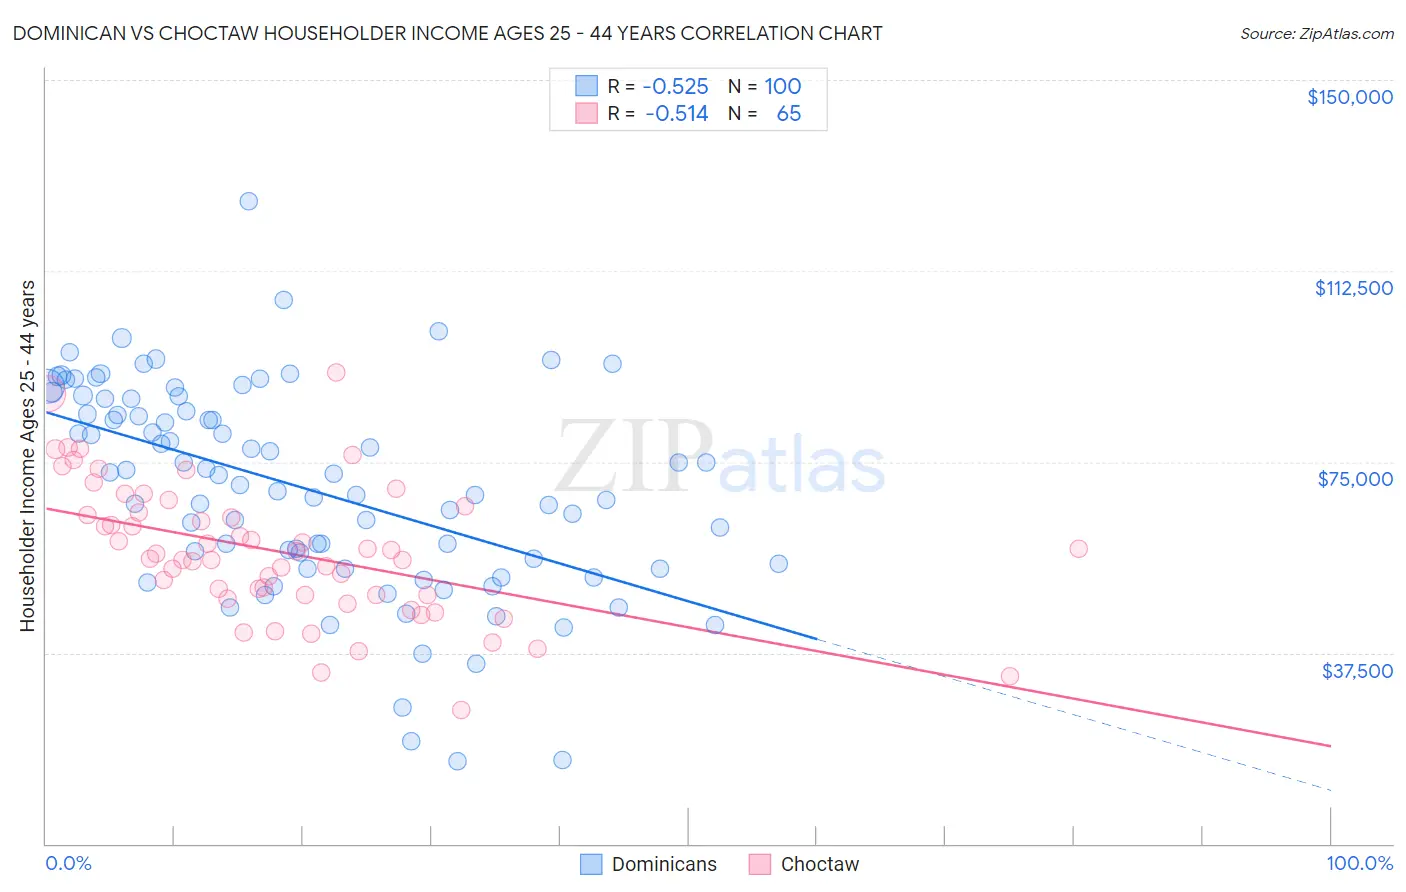 Dominican vs Choctaw Householder Income Ages 25 - 44 years